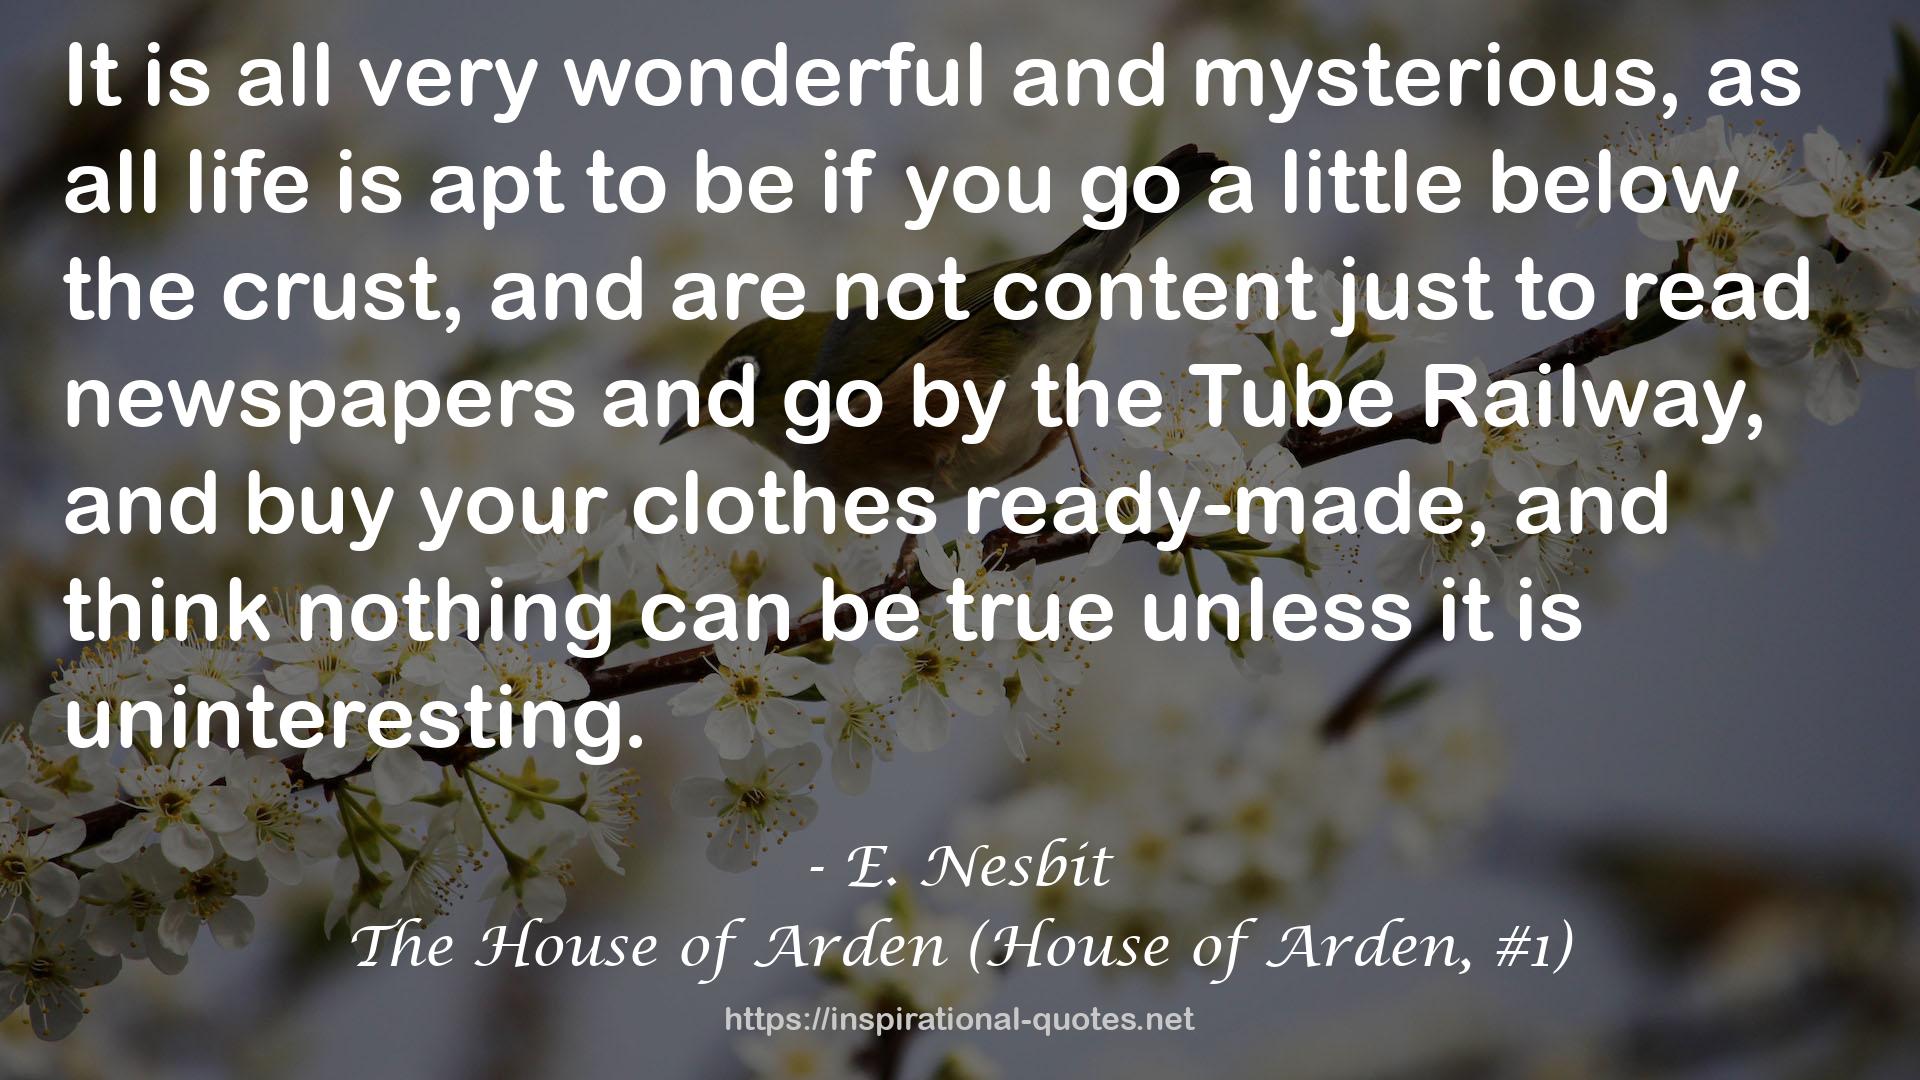 The House of Arden (House of Arden, #1) QUOTES